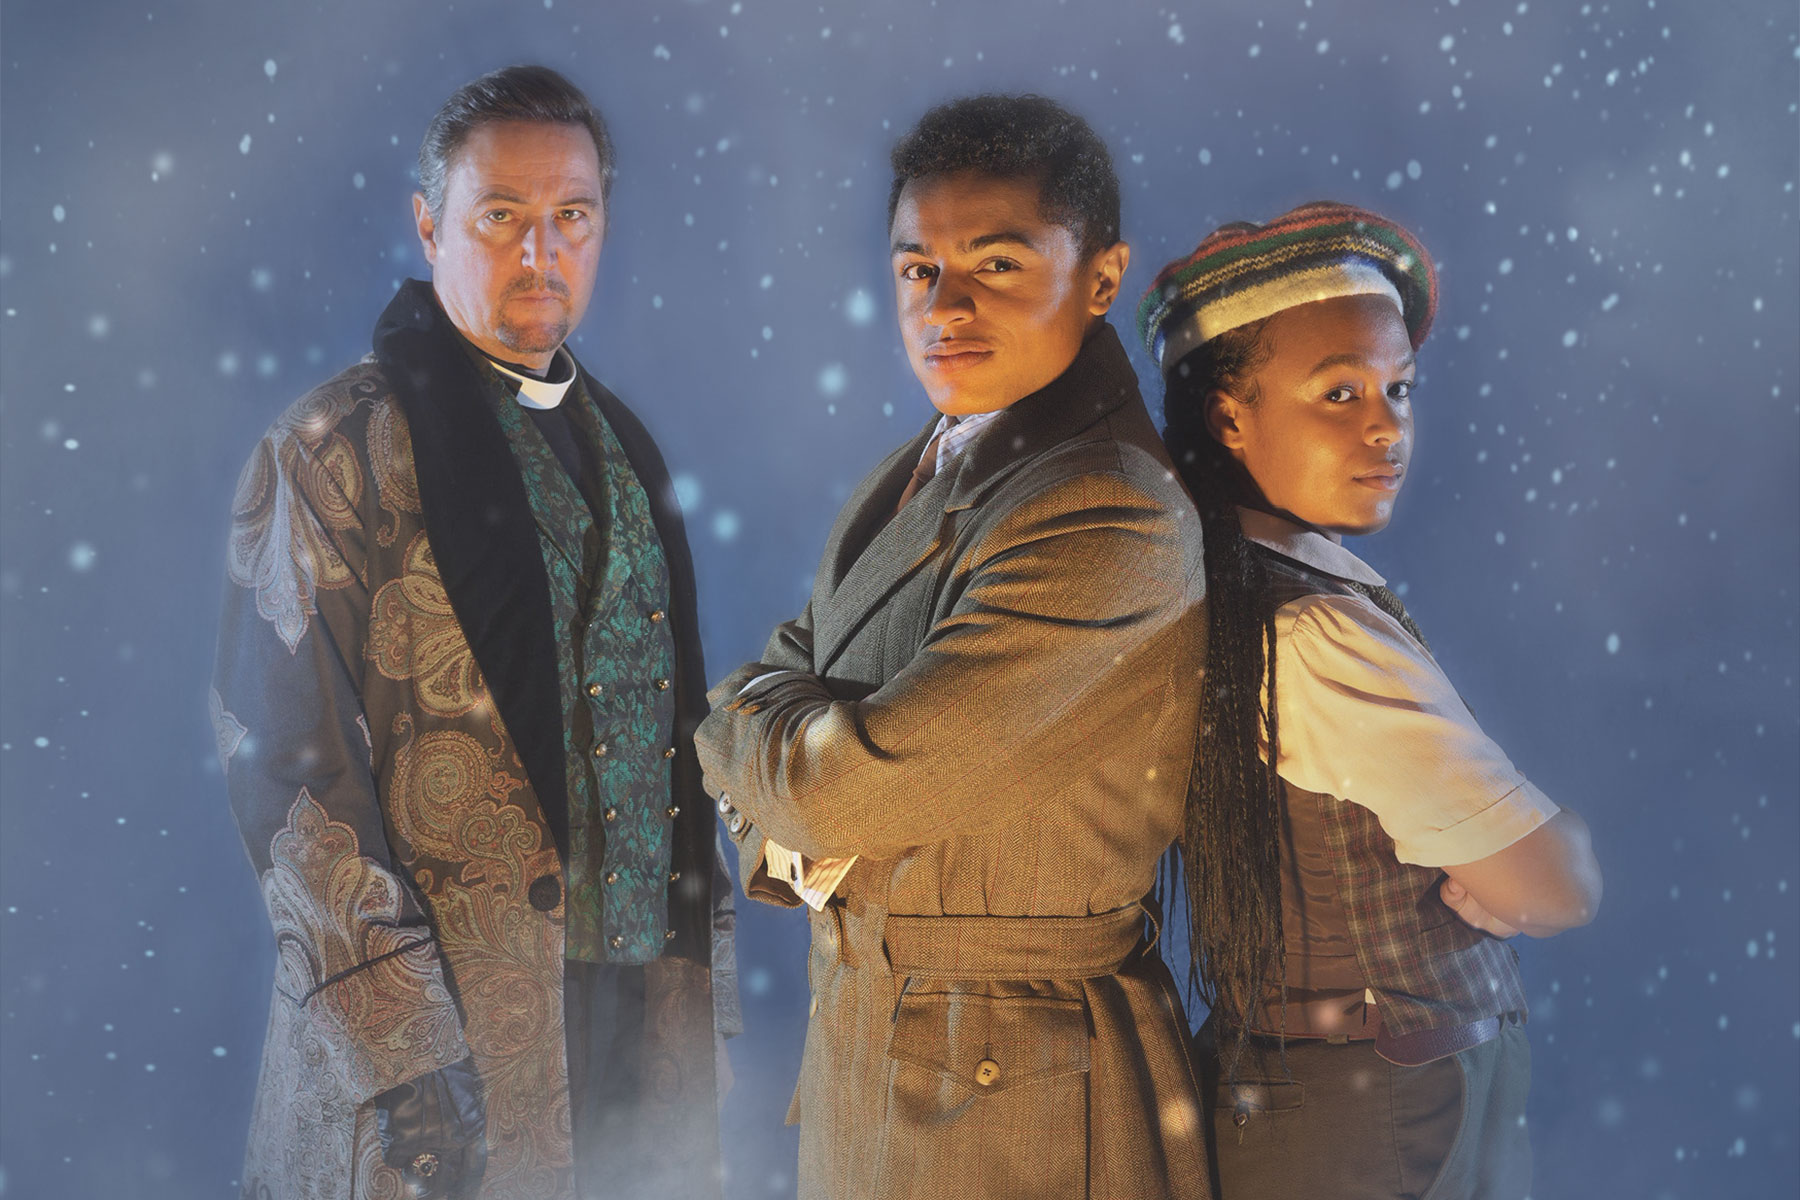 Richard Lynch as Abner, Callum Balmforth as Kay Harker and Mae Munuo as Maria Jones in a promotional image for The Box of Delights